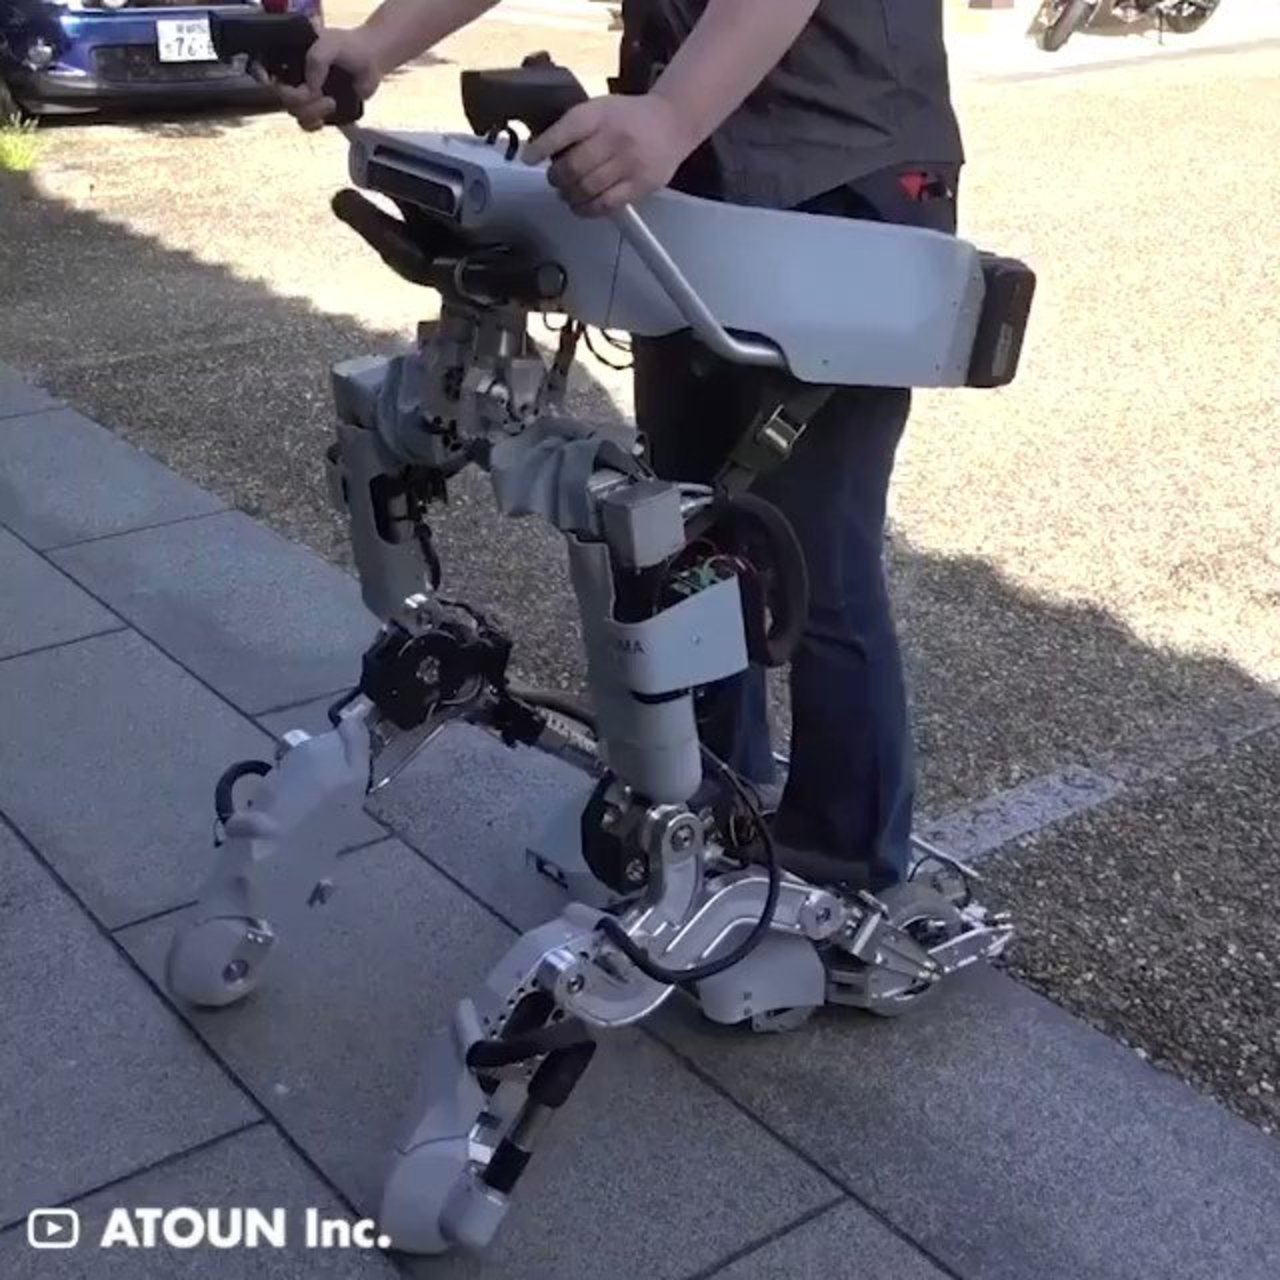 This powered #exoskeleton allows you to go up and down while carrying heavy objects. By @gigadgets_ #HealthTech #TechForGood #IoT #Socialmedia #innovation Cc @kalydeoo @KanezaDiane @CurieuxExplorer @enilev @gvalan @labordeolivier @JBarbosaPR @diioannid @IrmaRaste @AshokNellikar https://t.co/aY7FVcuOLC